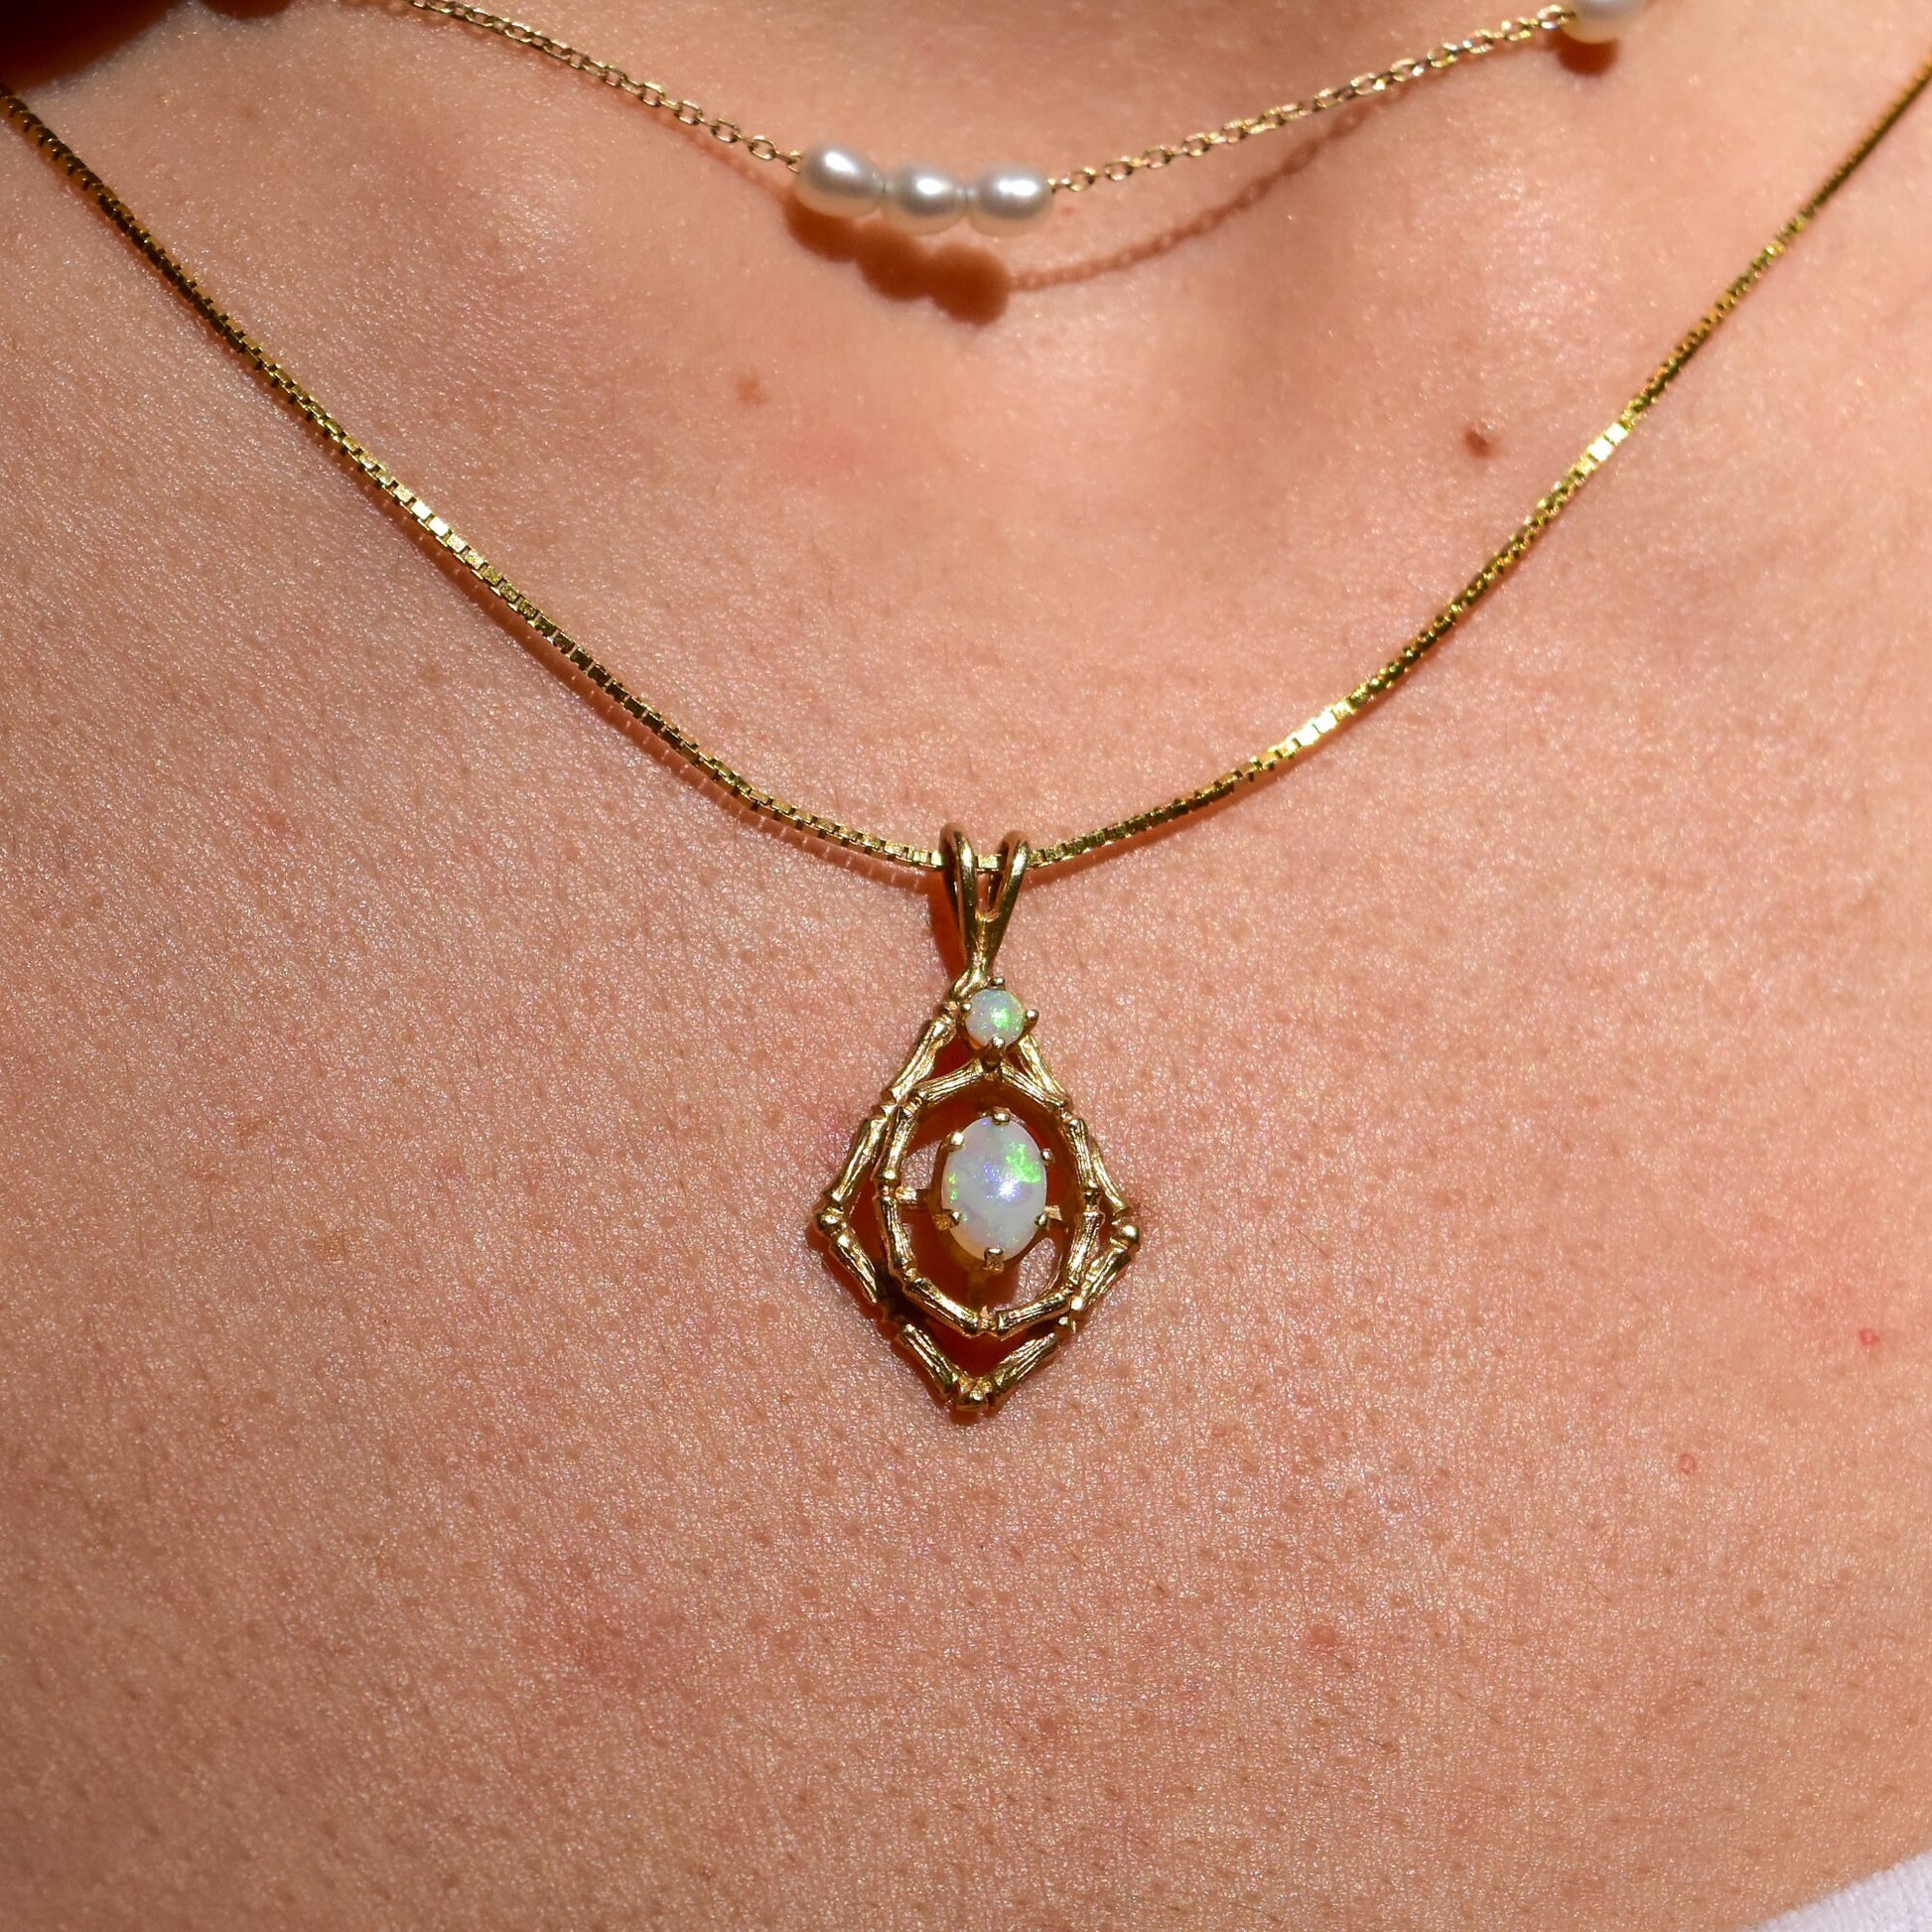 10K yellow gold pendant necklace with bamboo motif featuring two white opal cabochon stones, estate jewelry piece measuring 26mm in length.